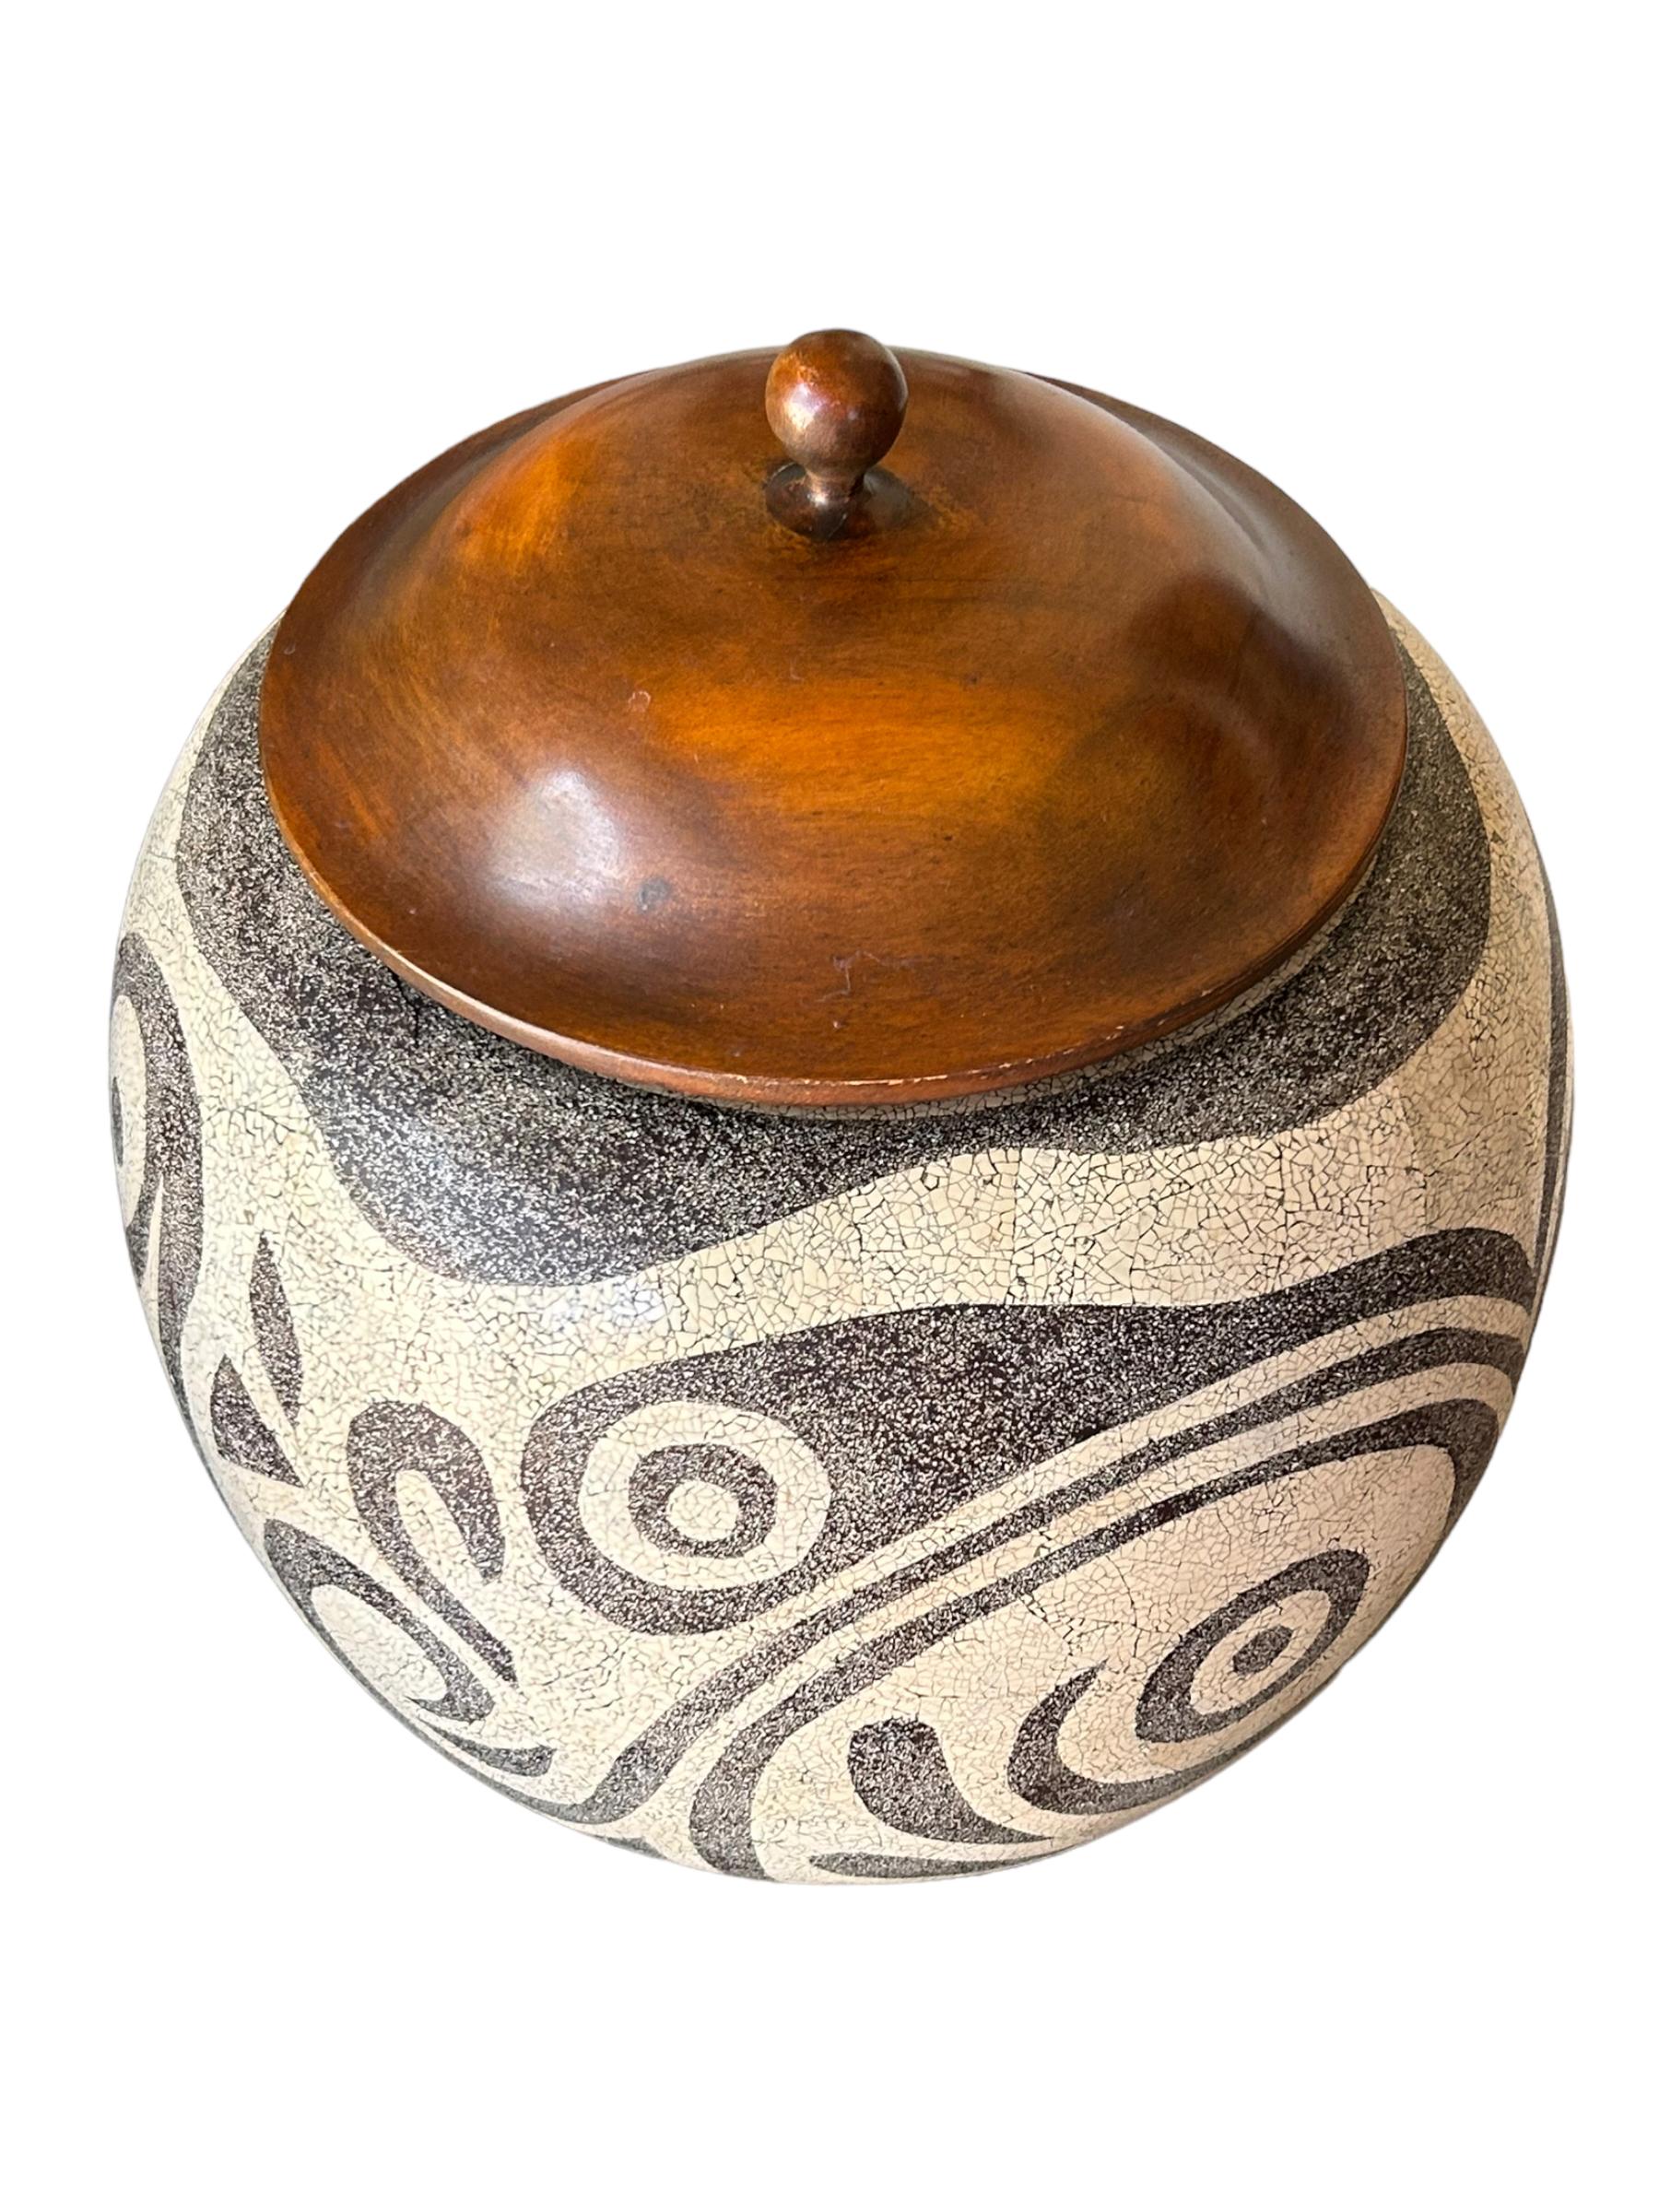 Theodore Alexander, founded by Paul Maitland Smith, an industry legend who developed high end furniture production throughout Asia, is one of the leading manufacturers of fine furniture.  This vintage pottery pot is a striking piece of art that